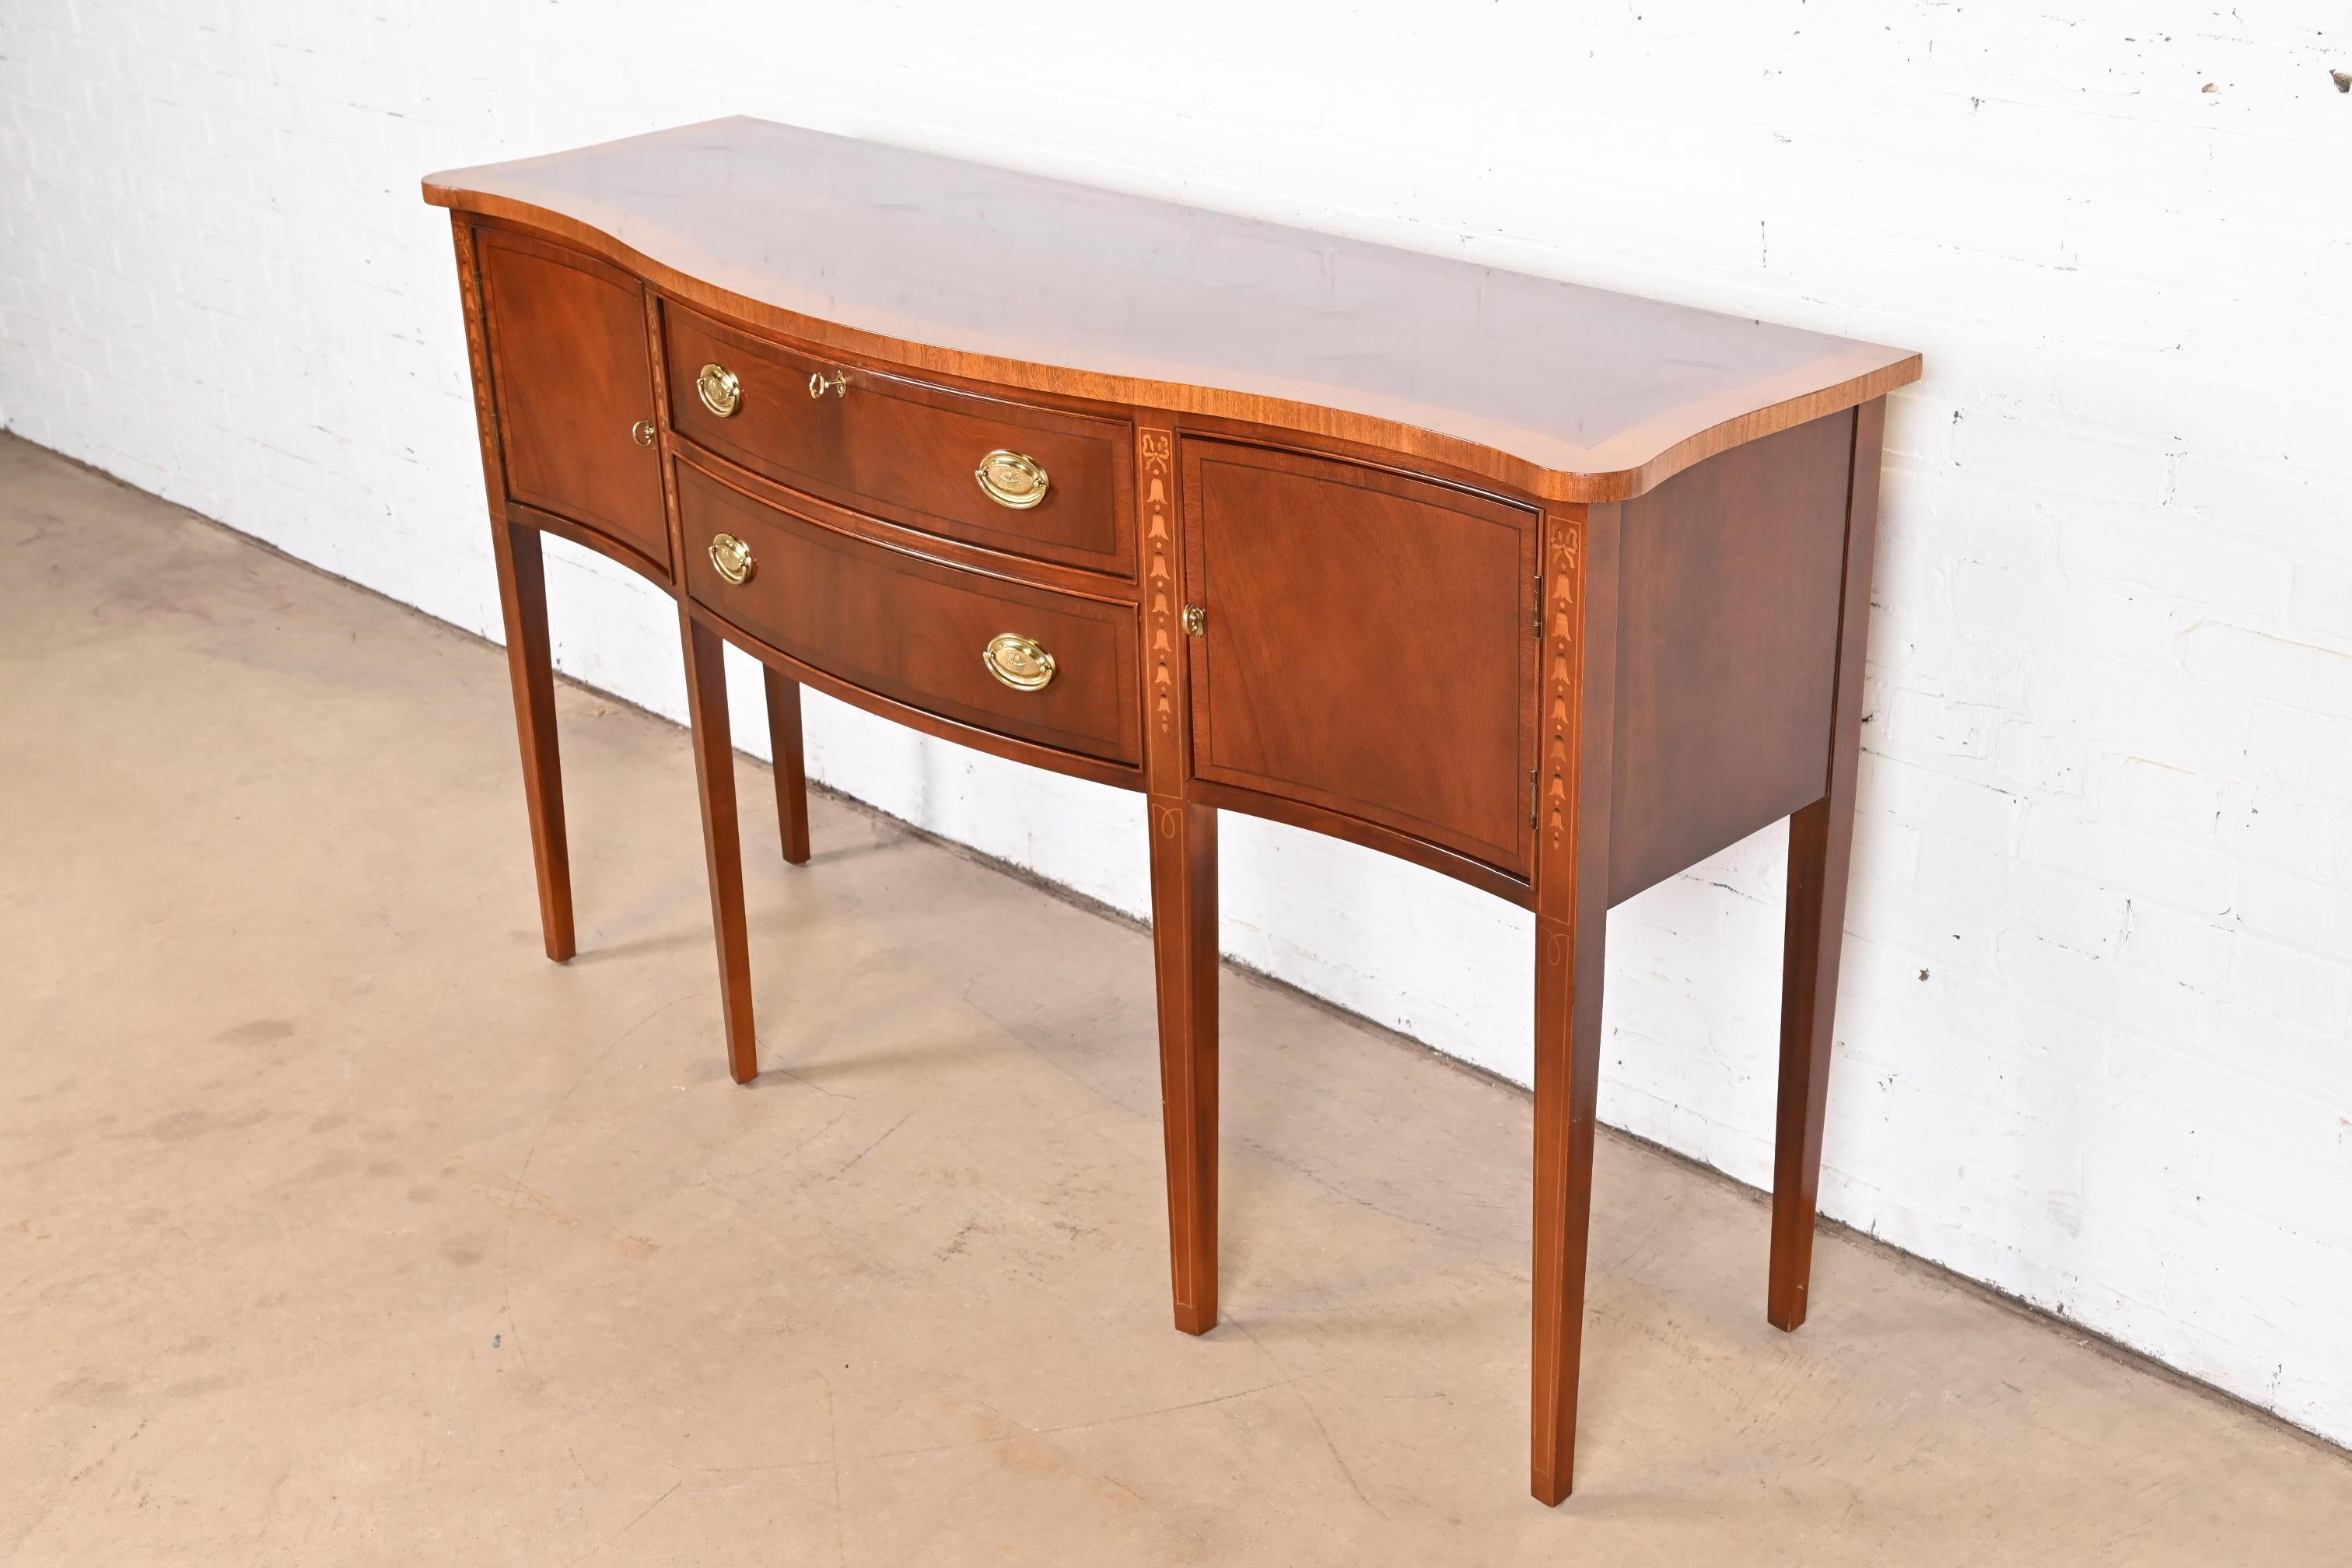 20th Century Hepplewhite Inlaid Mahogany Serpentine Front Sideboard Credenza For Sale